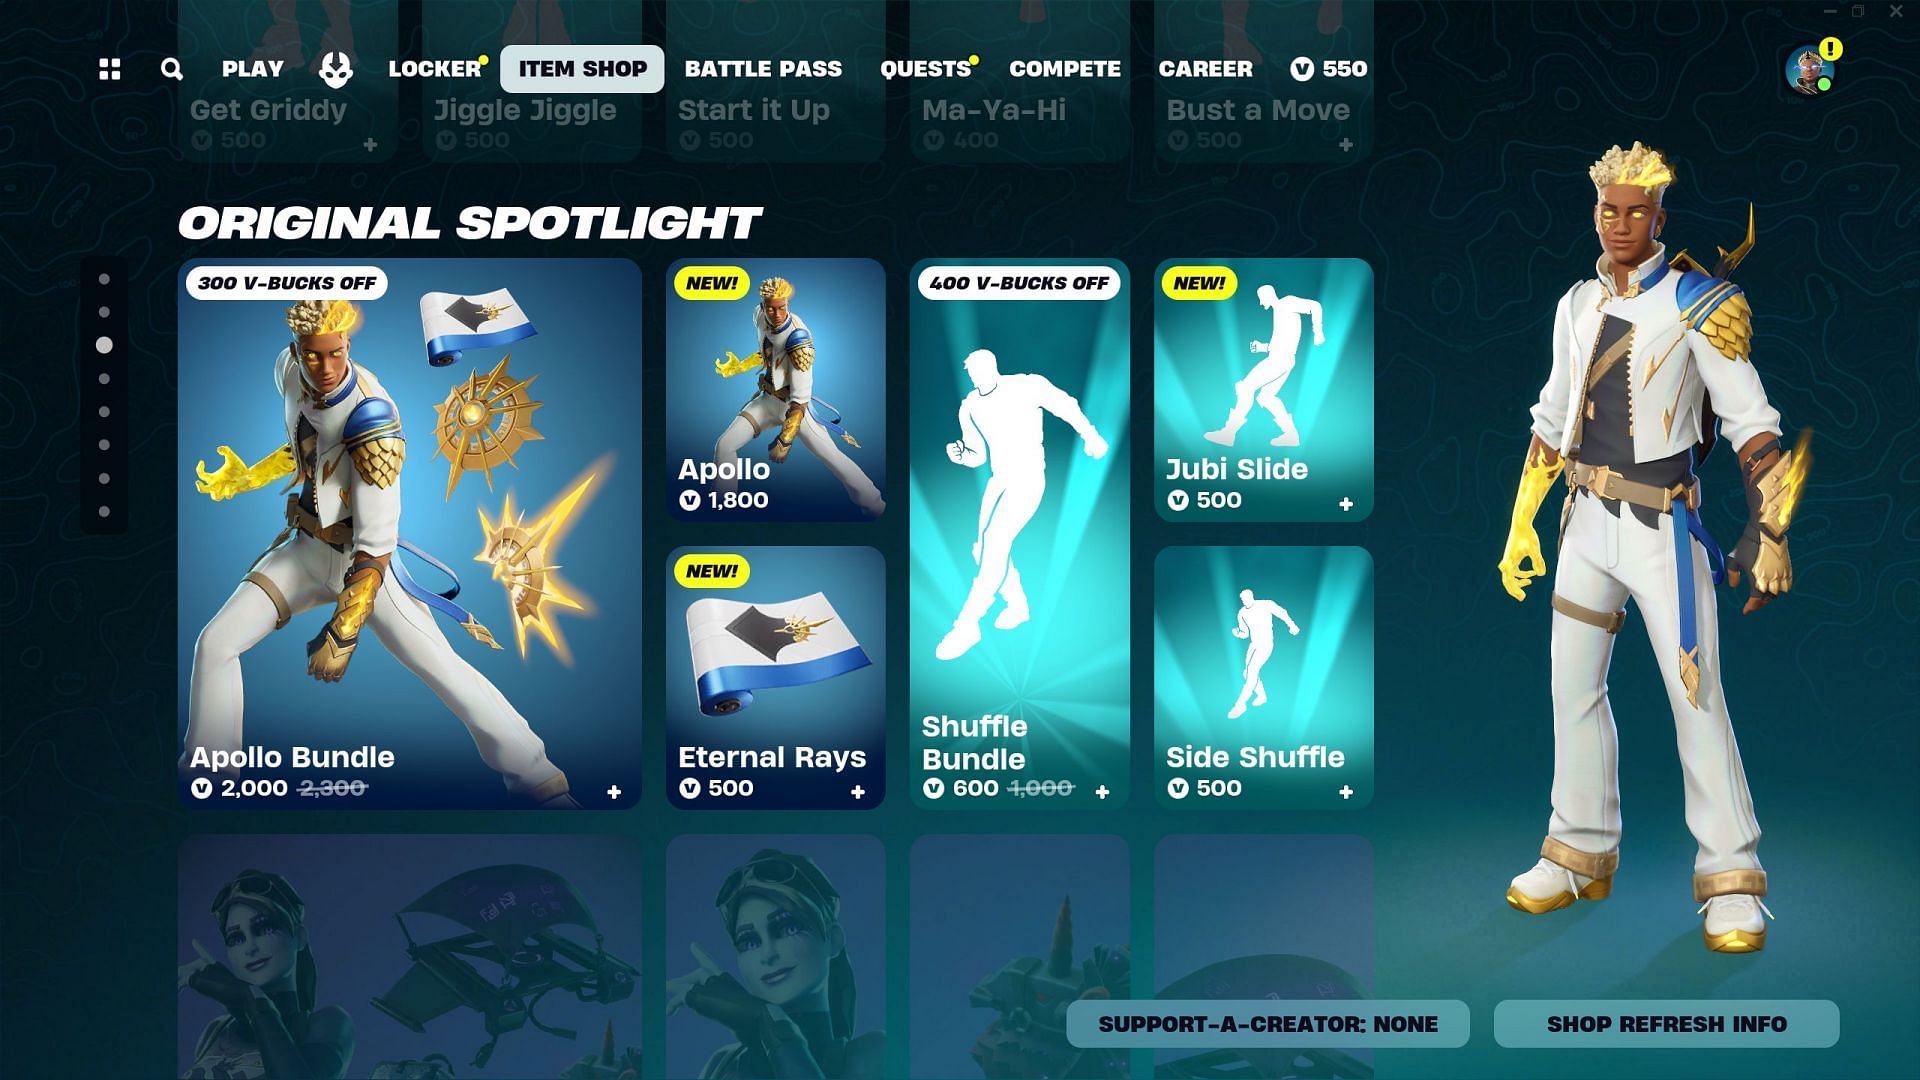 Apollo skin is currently listed in the Item Shop (Image via Epic Games/Fortnite)